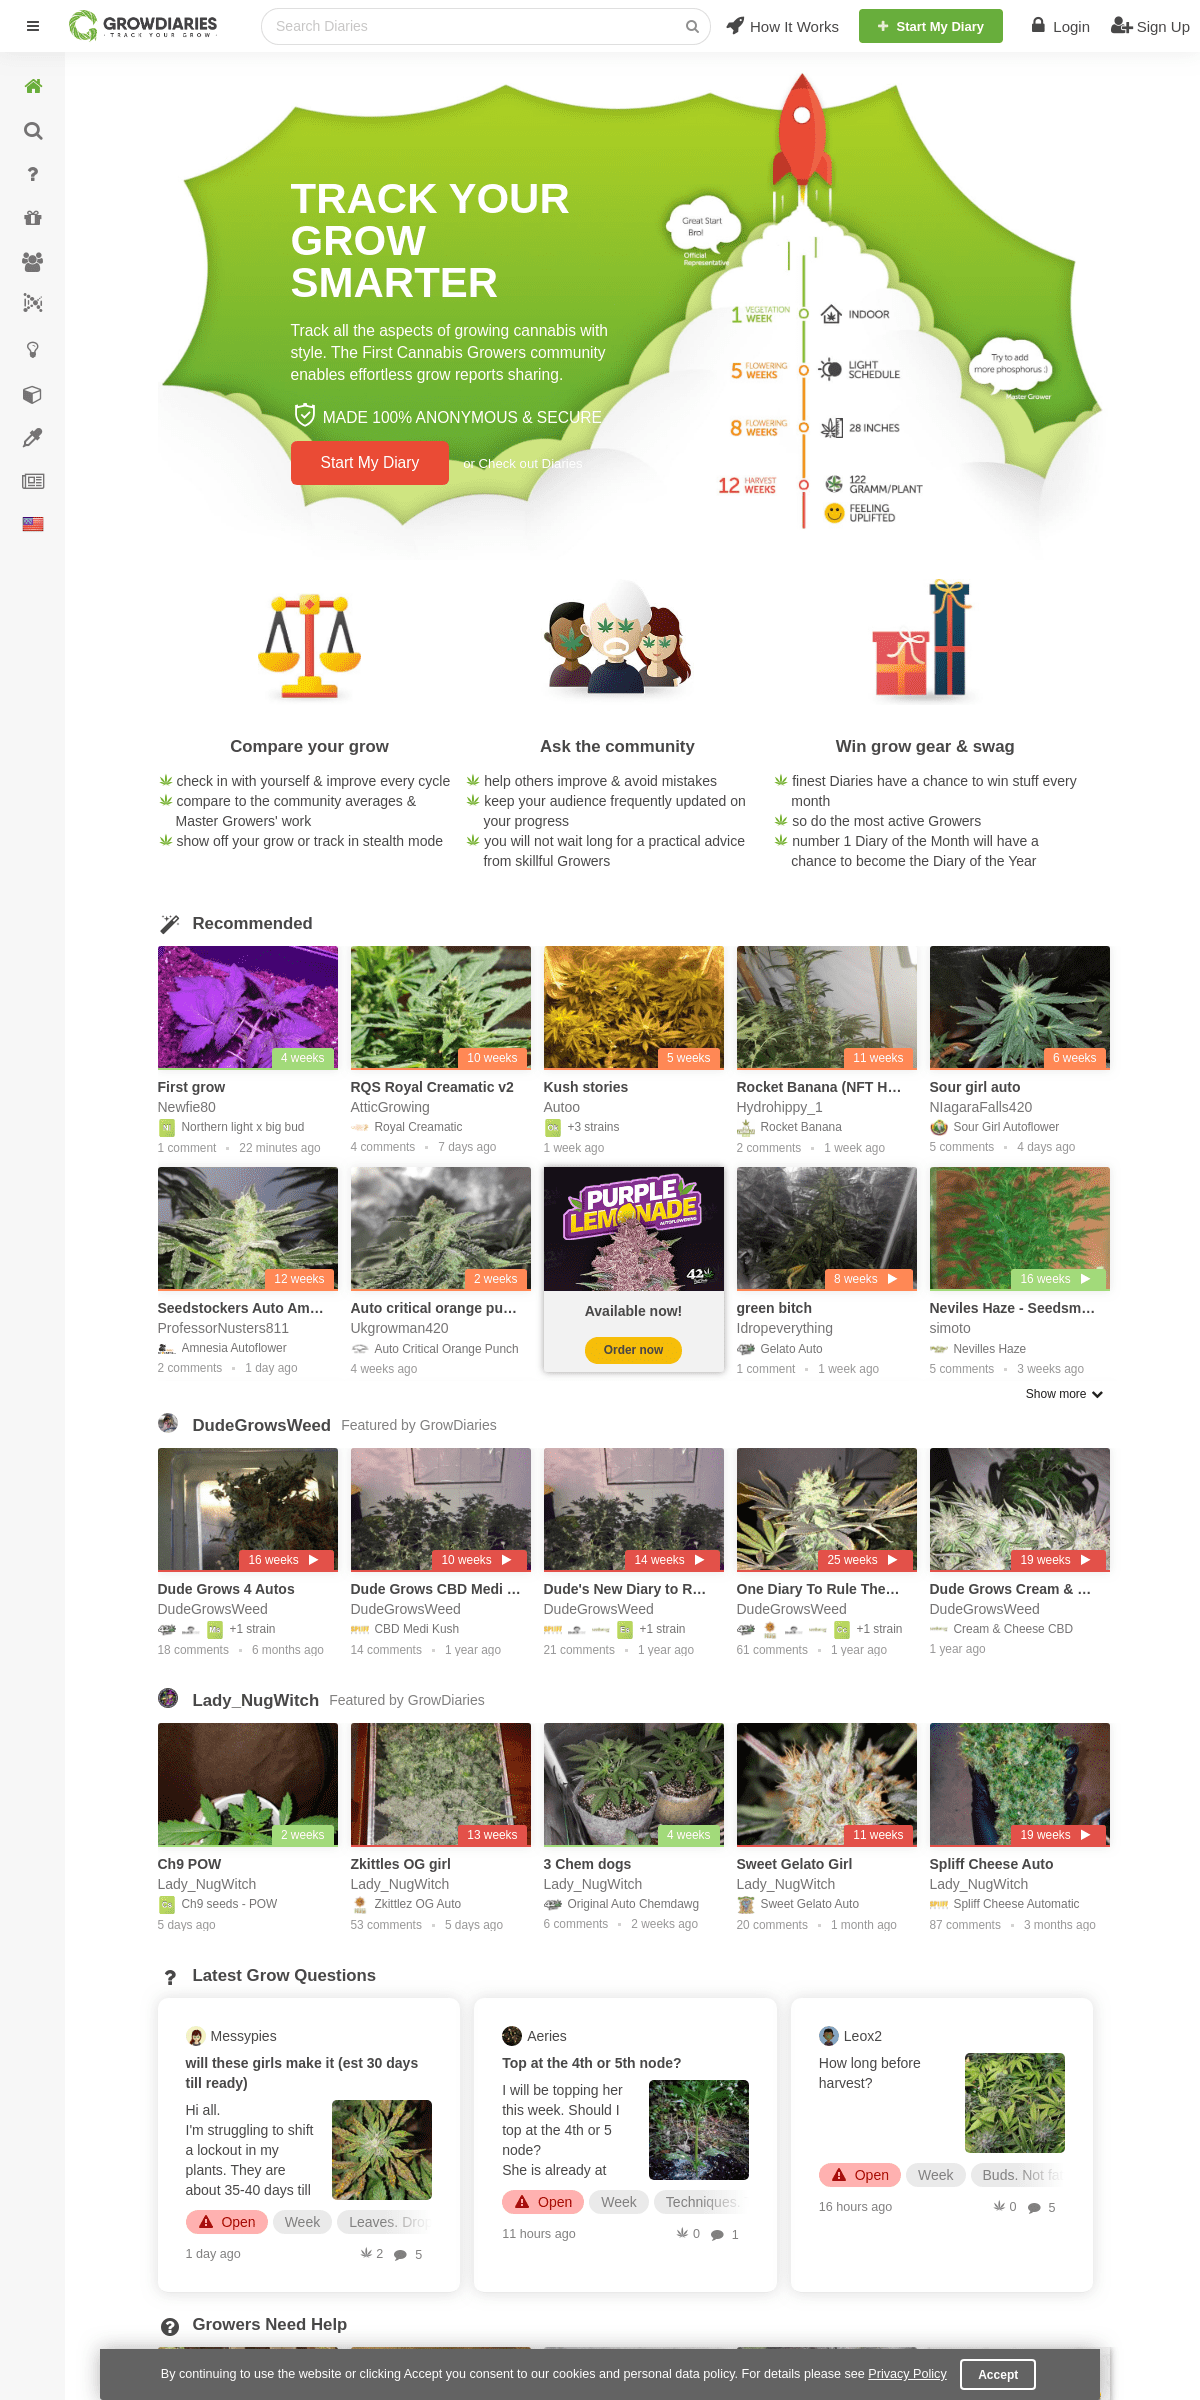 A complete backup of growdiaries.com